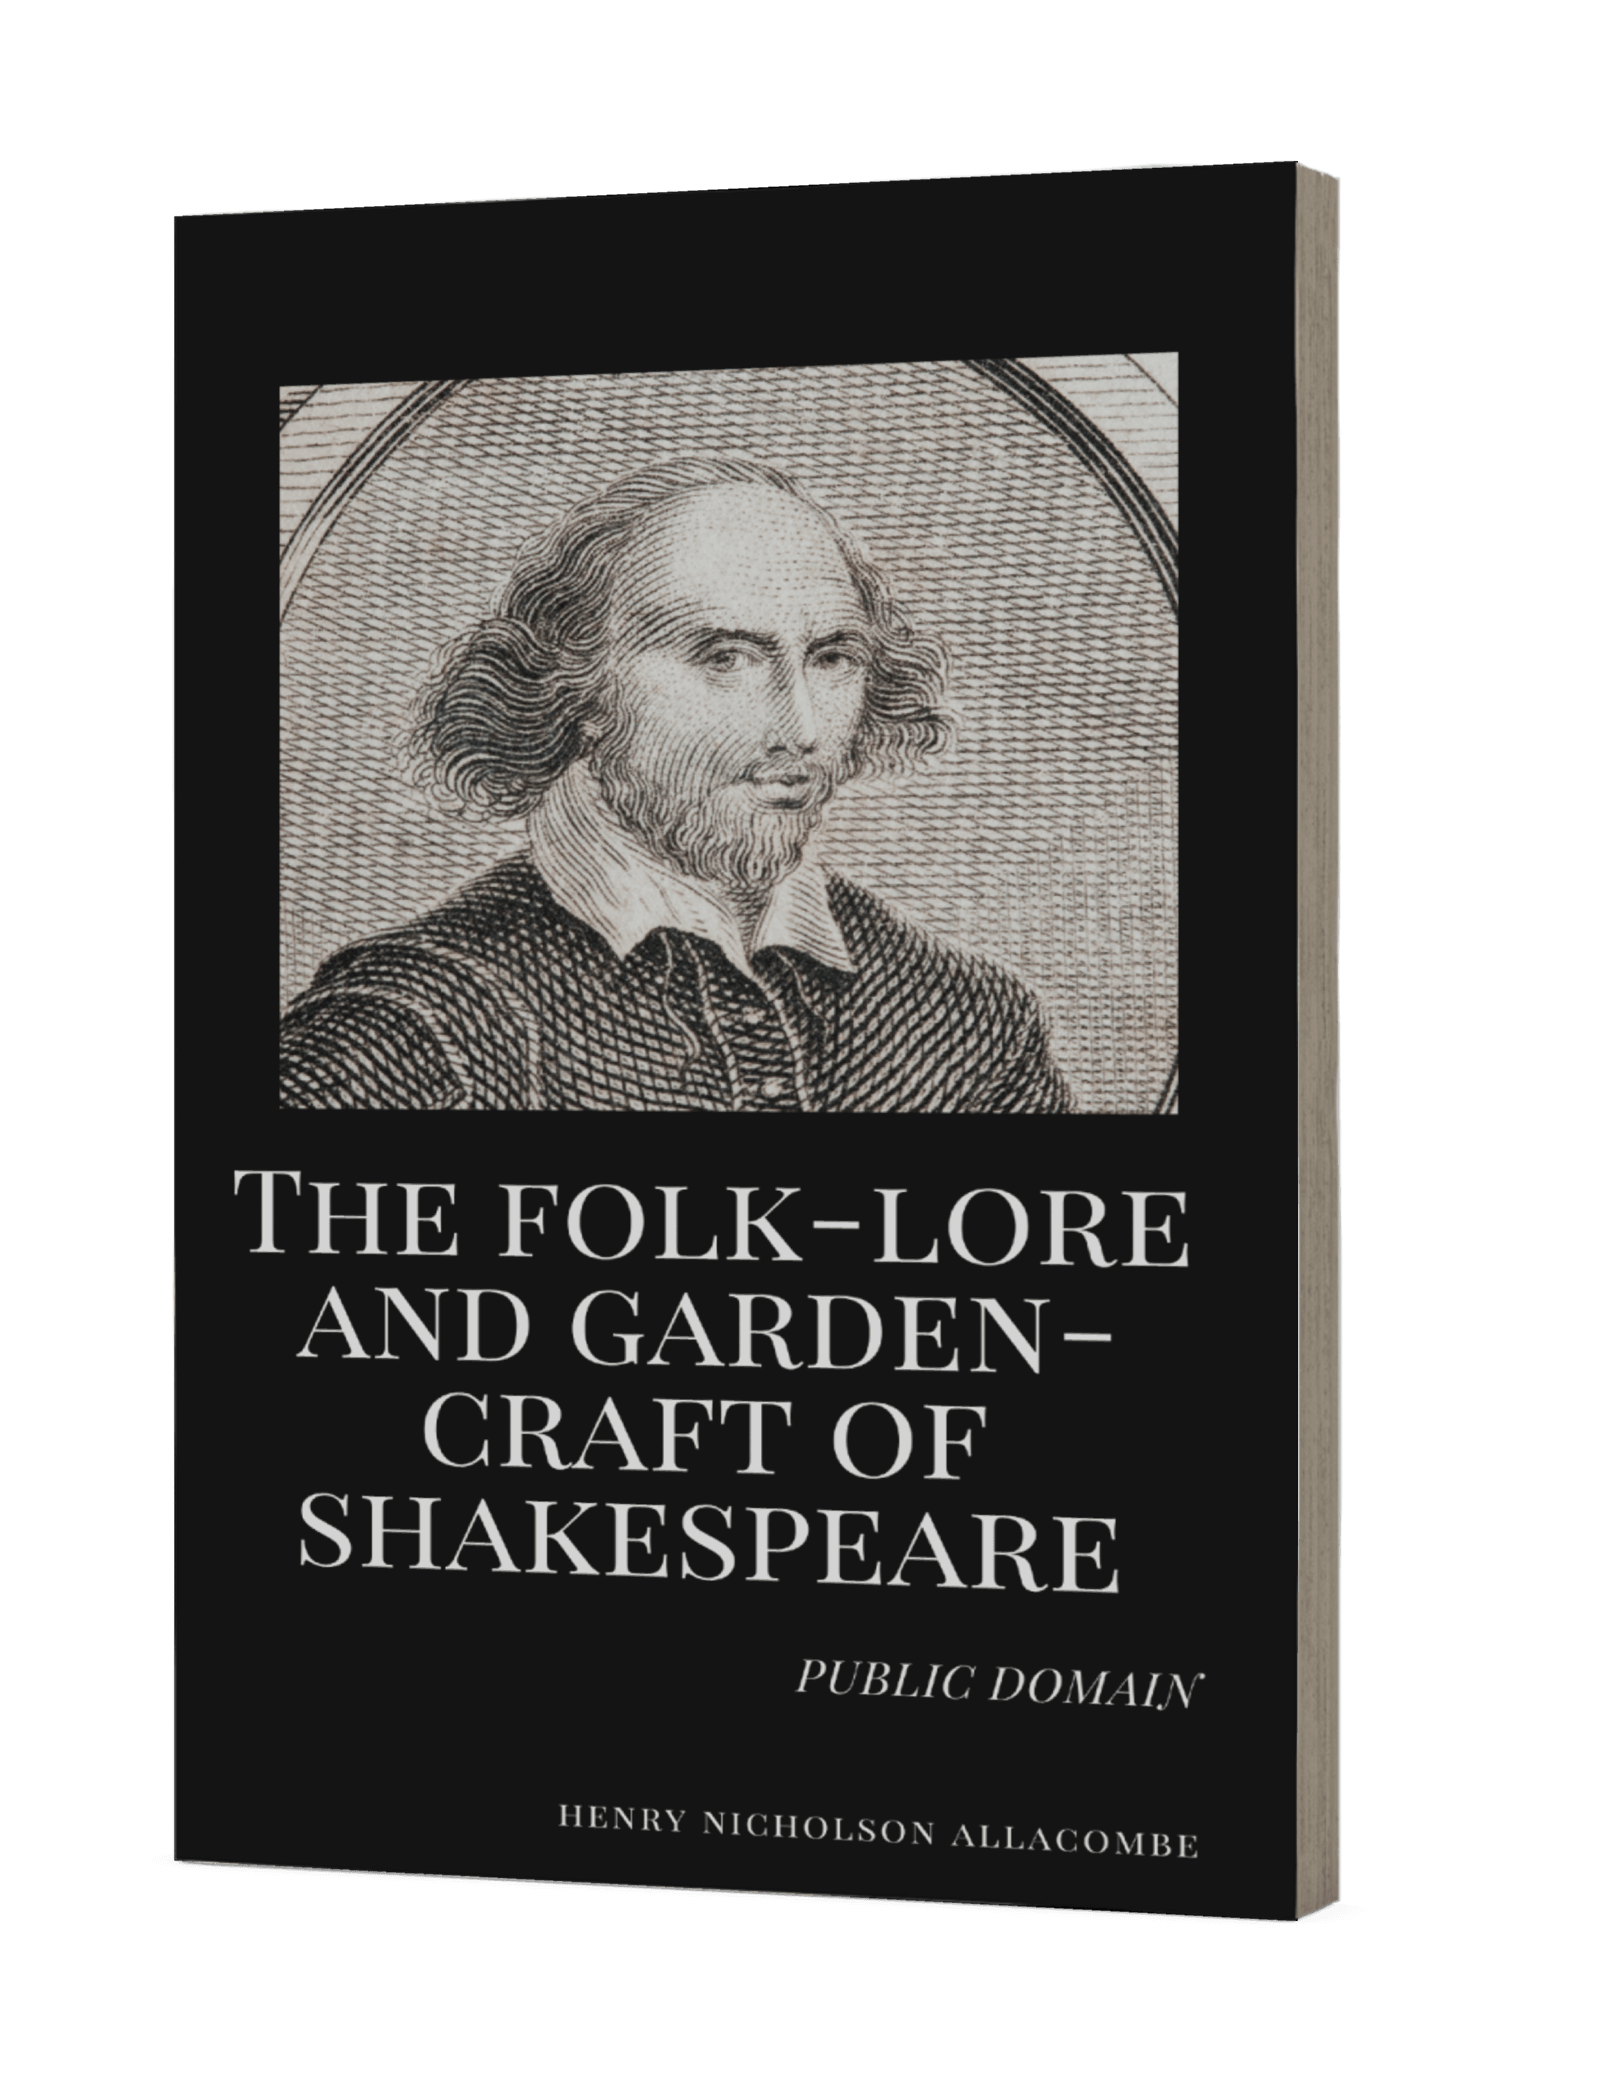 The fol-lore and garden-craft of shakespeare book